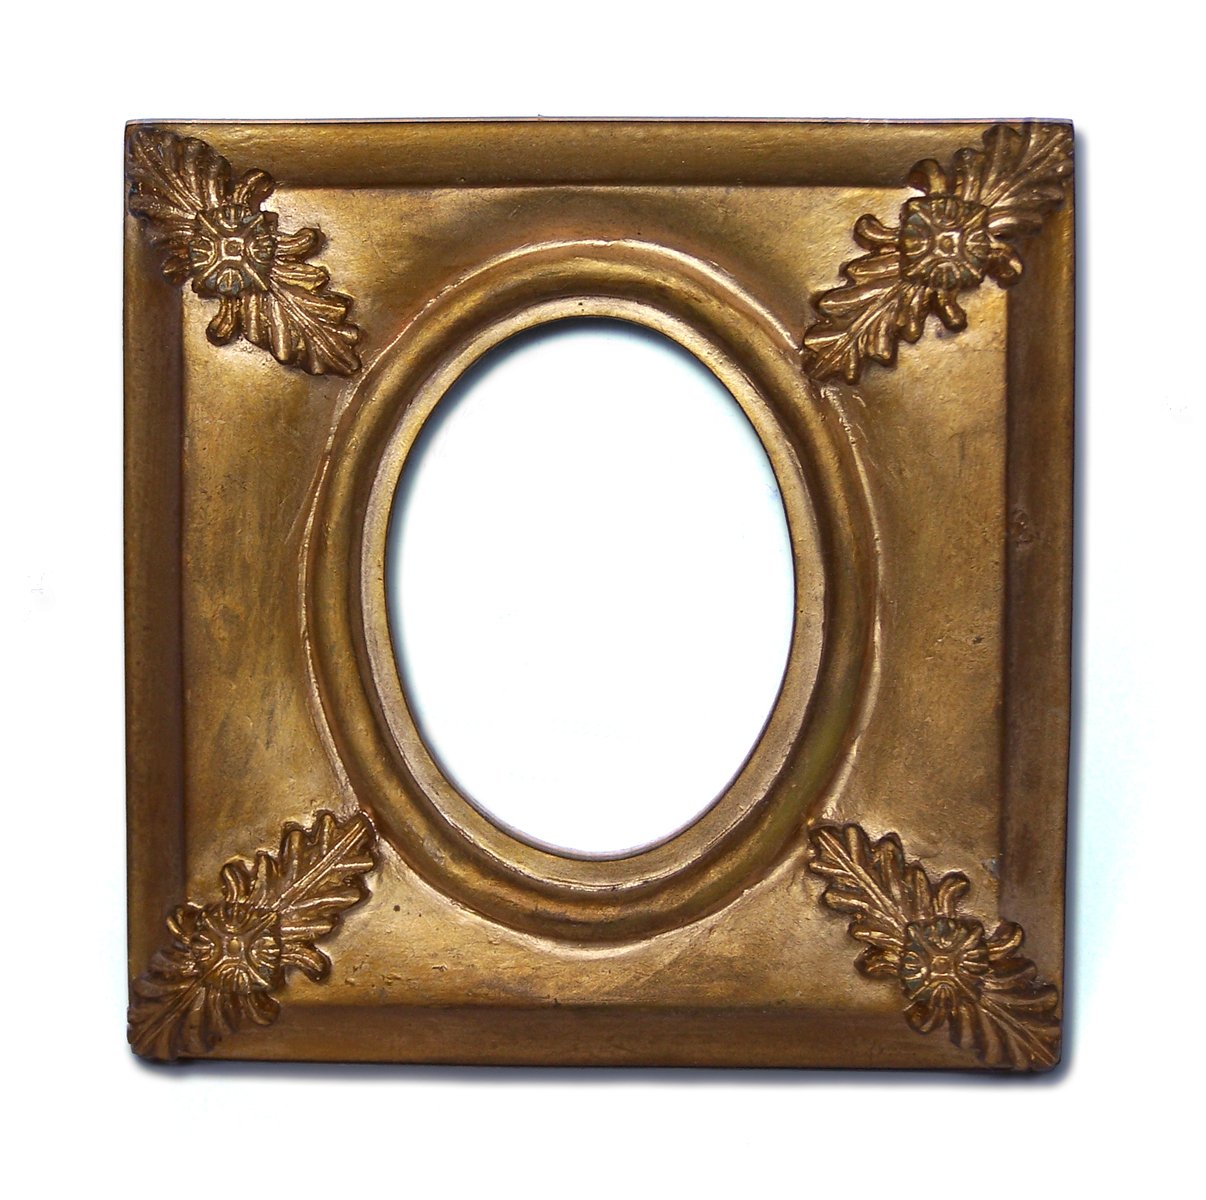 a gold frame that has flowers and leaves in it